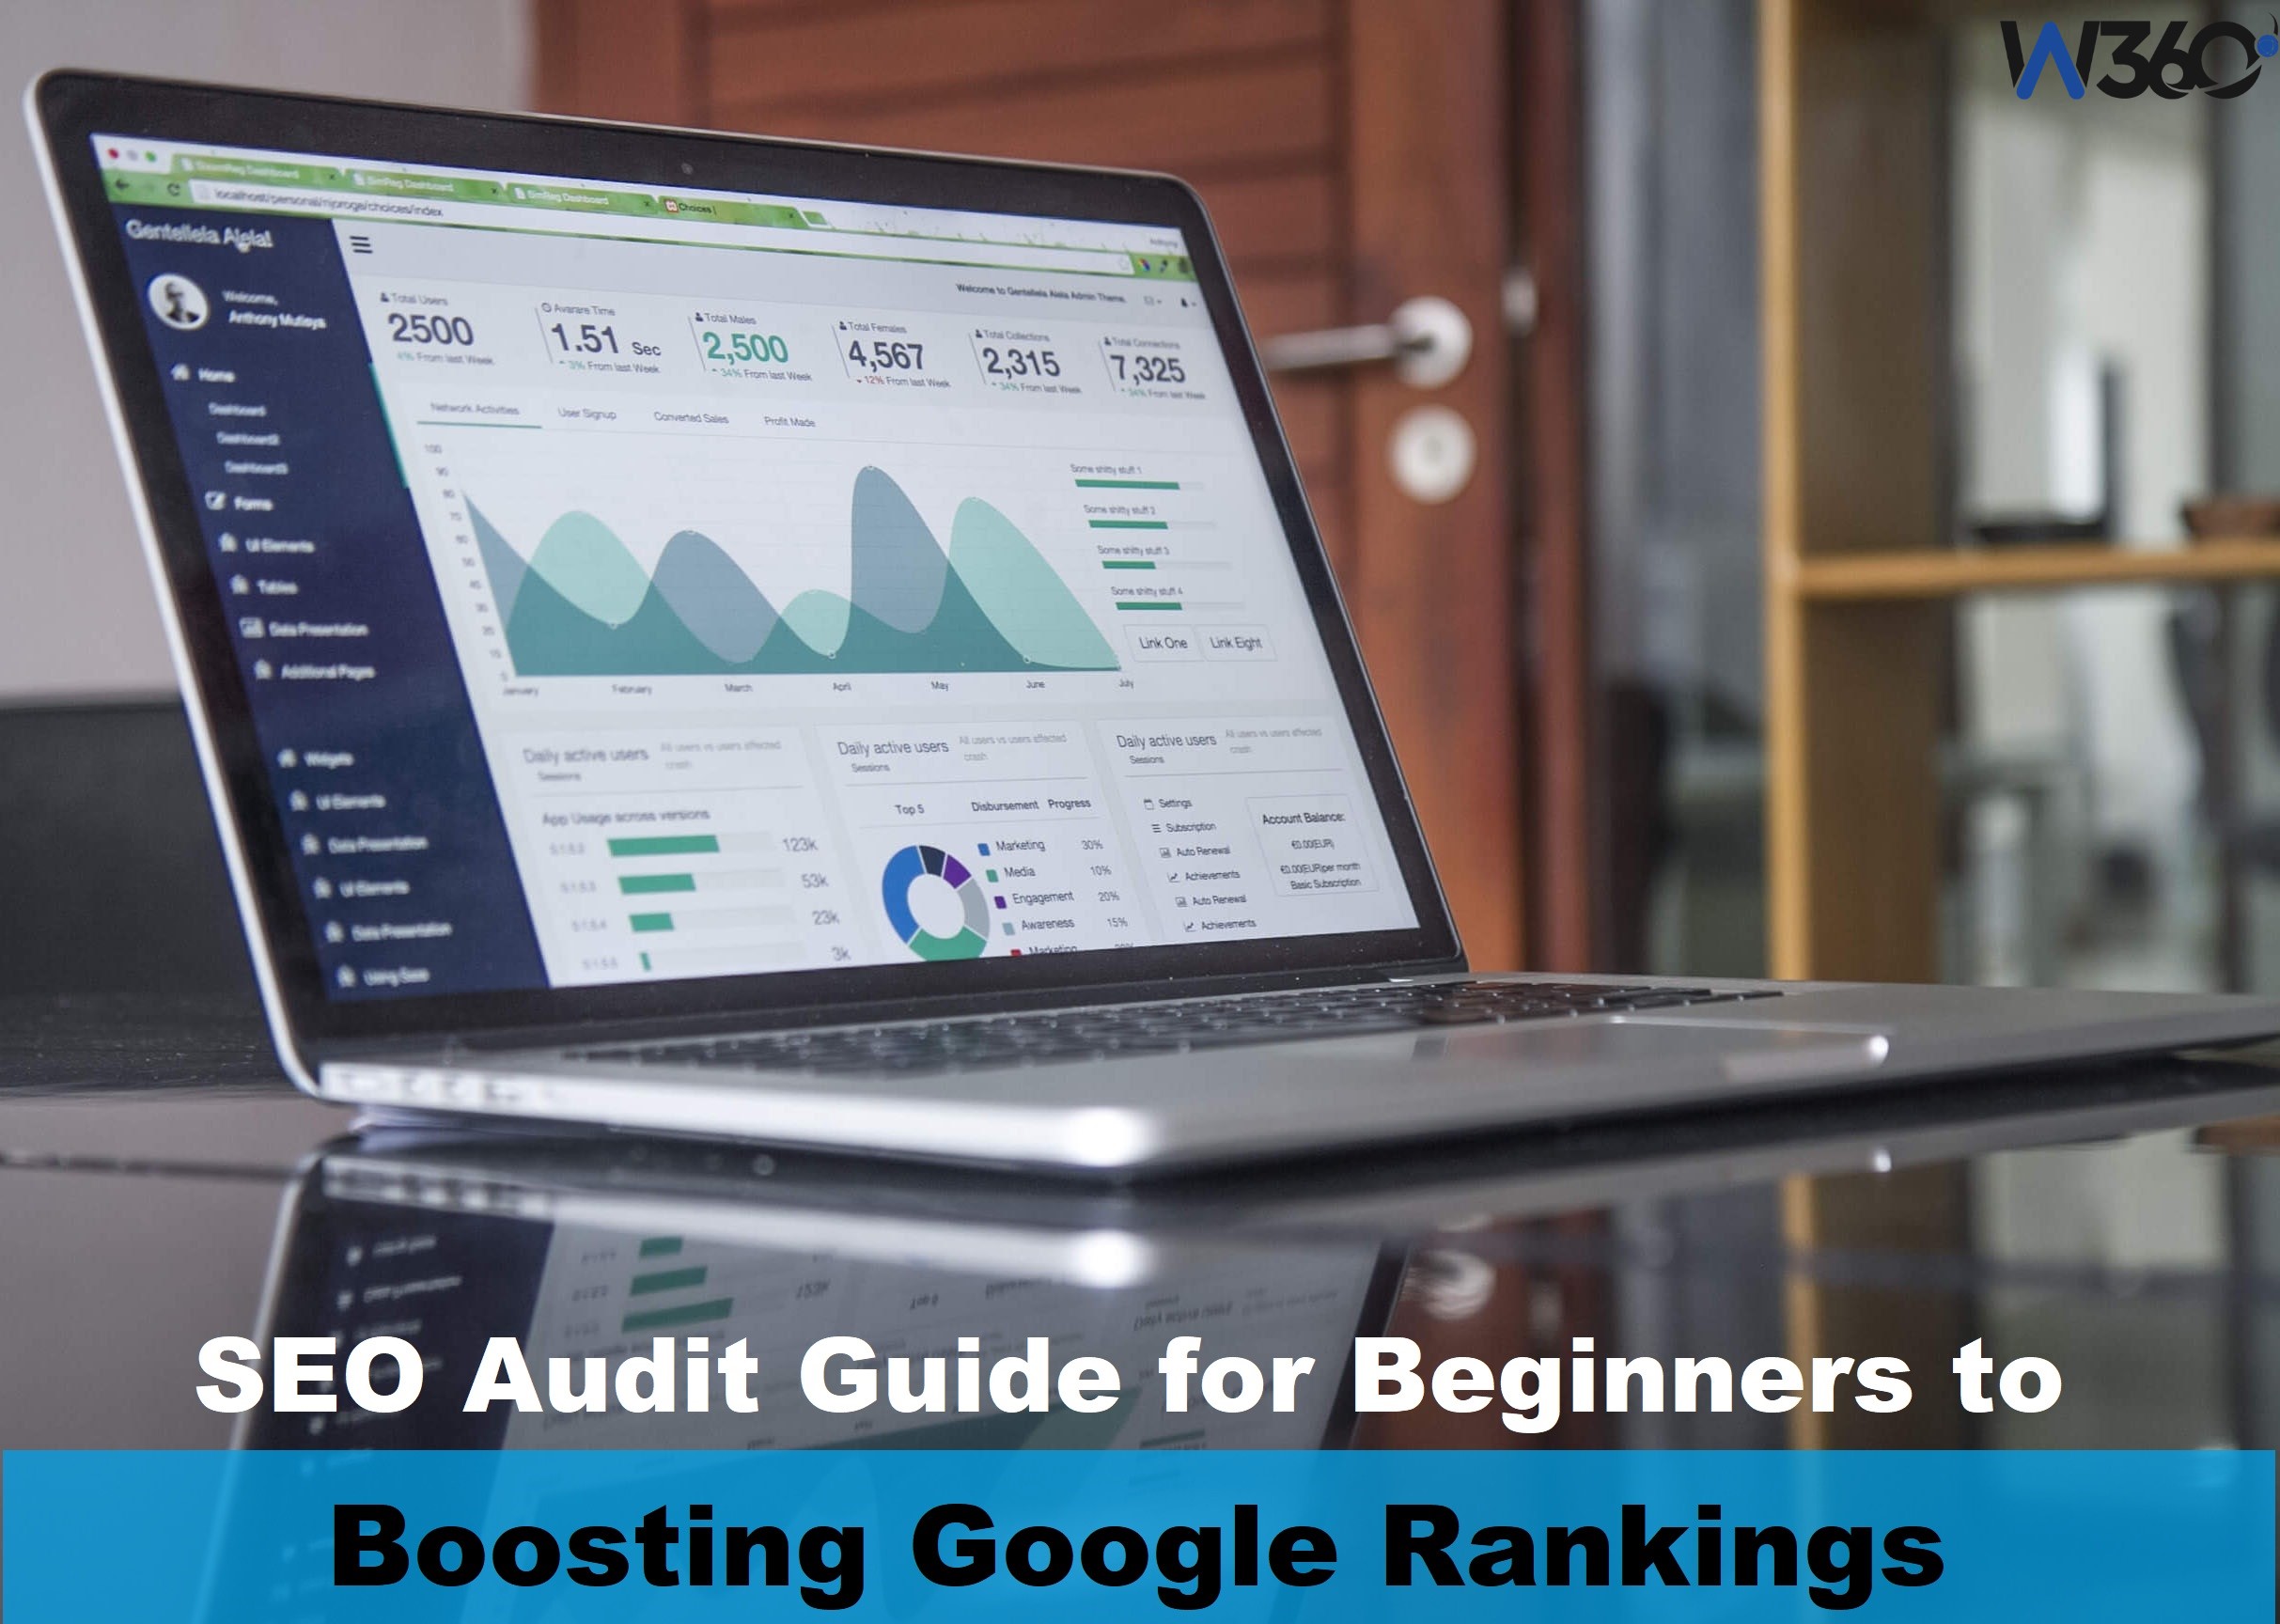 SEO Audit Guide for Beginners to Boosting Google Rankings